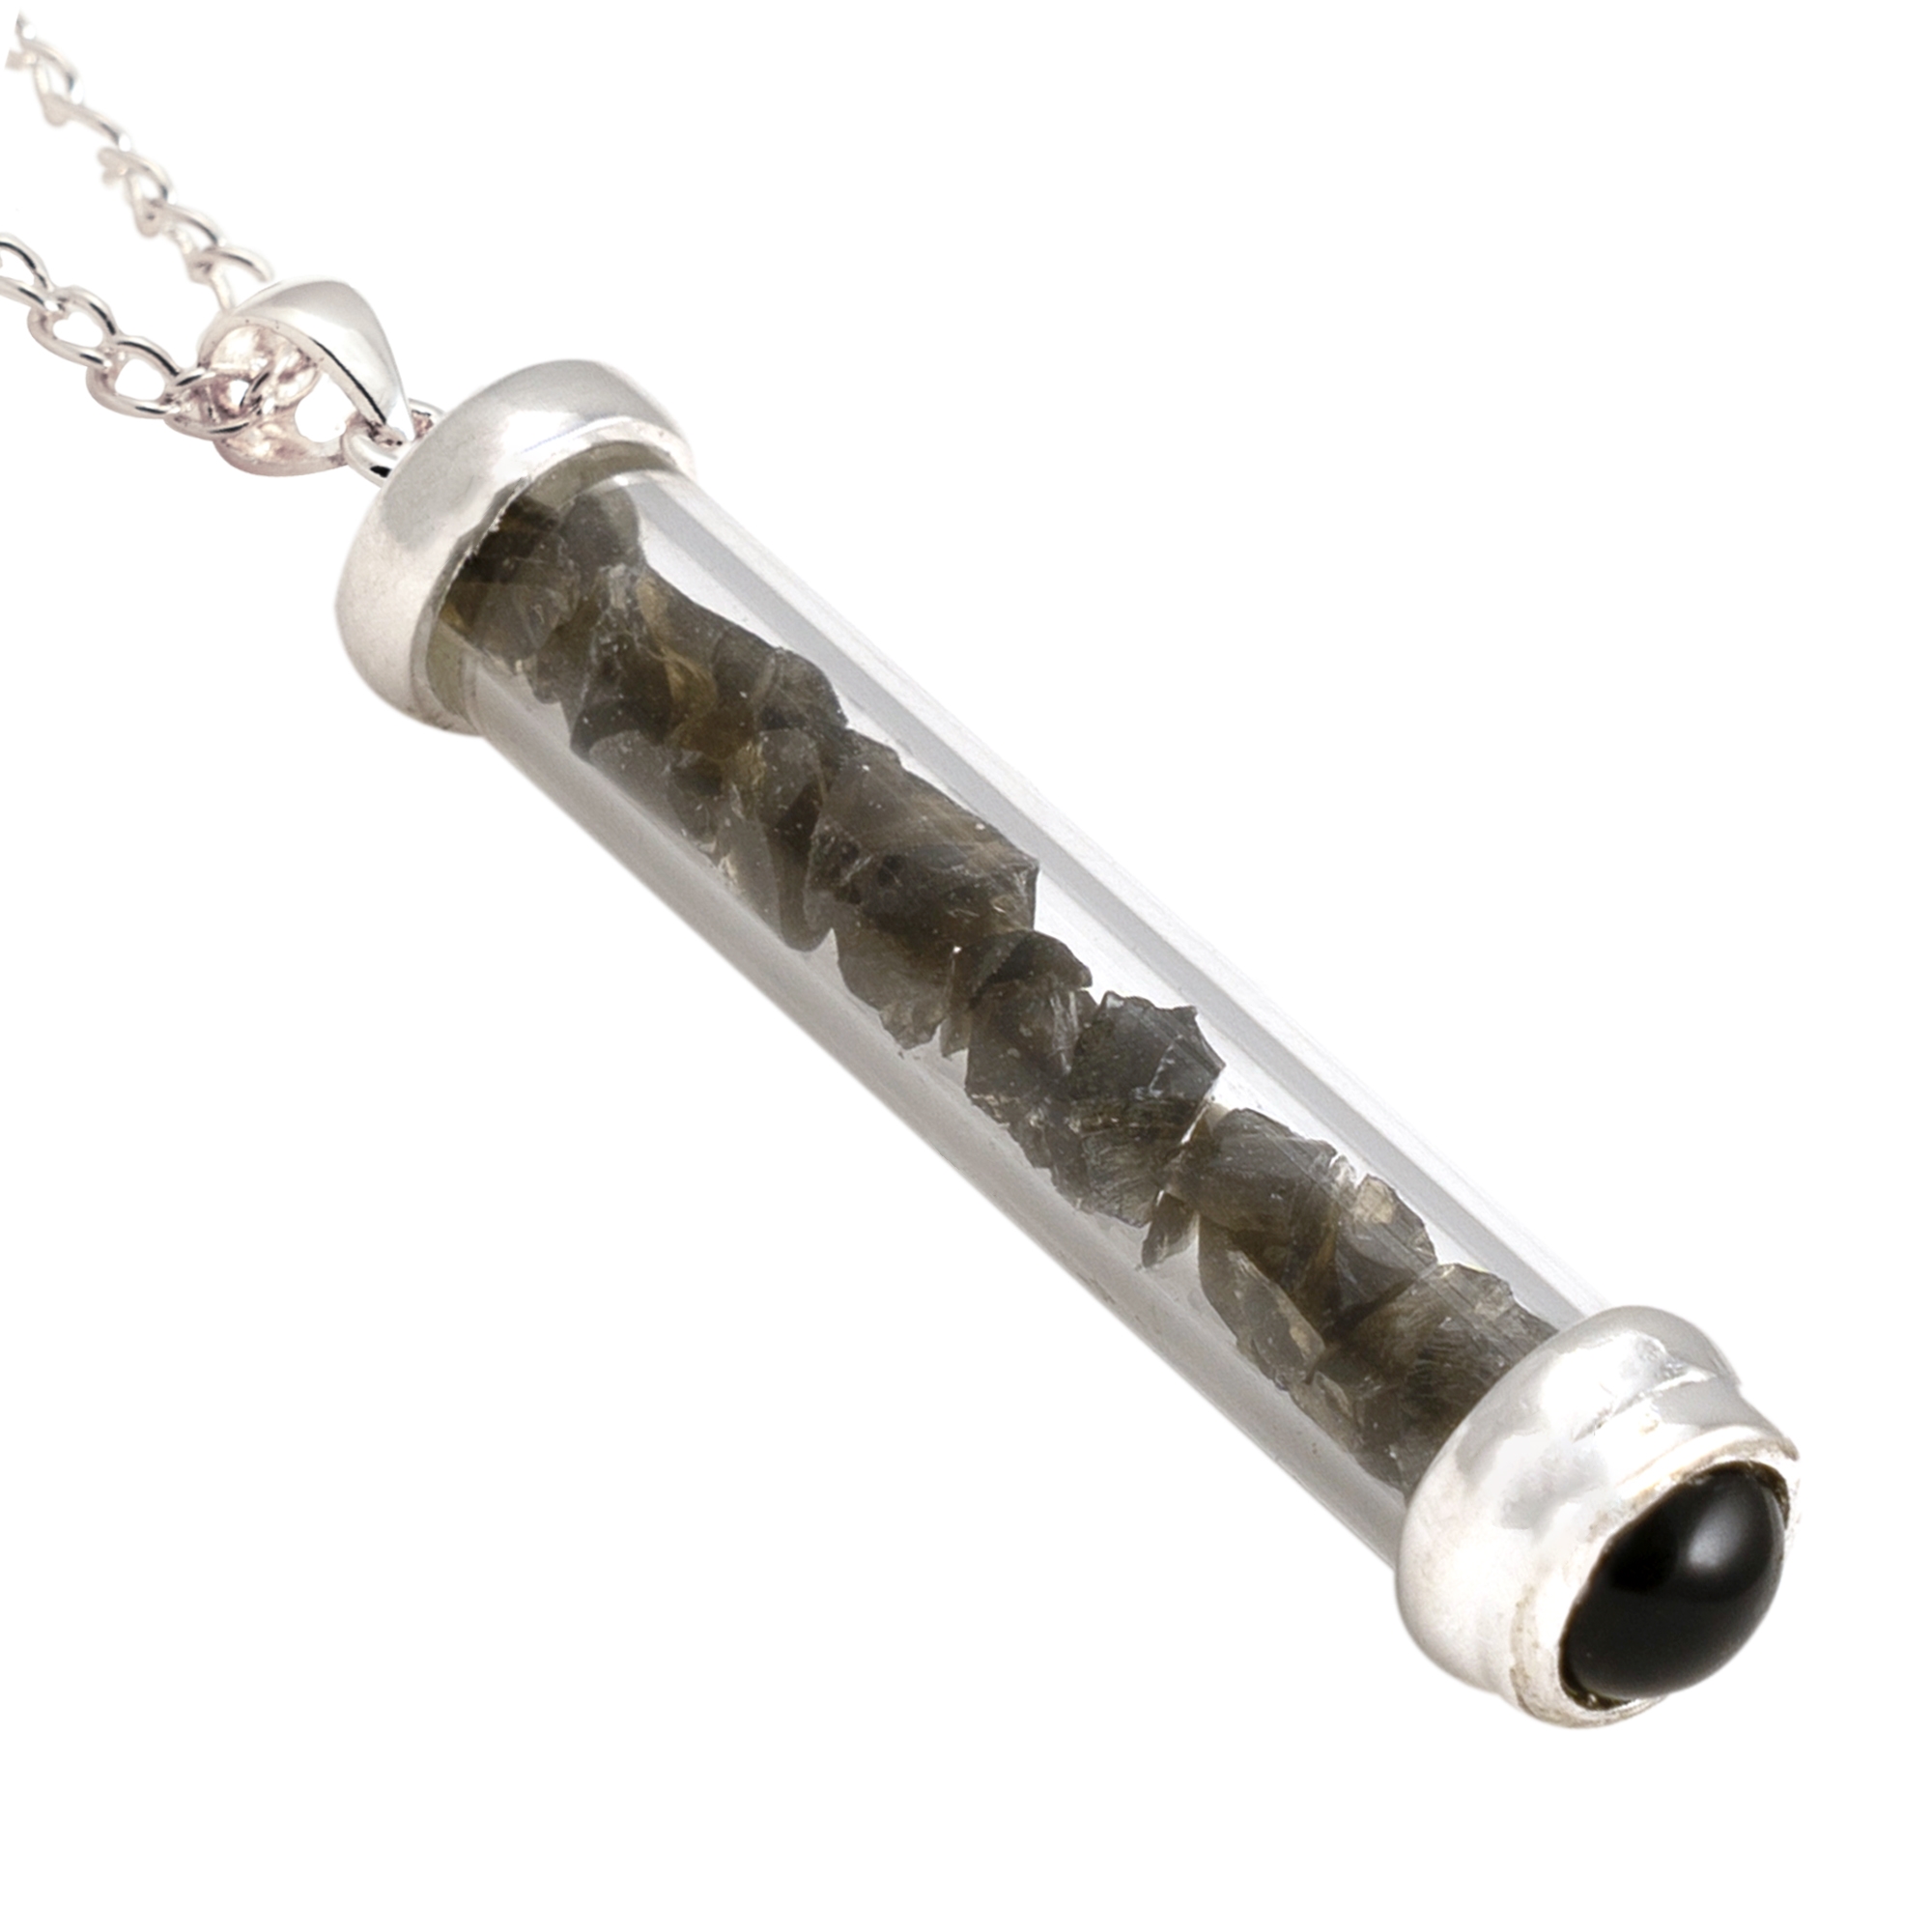 OBSIDIAN GEM POWER VIAL PENDANT FOR GROUNDING - Click Image to Close